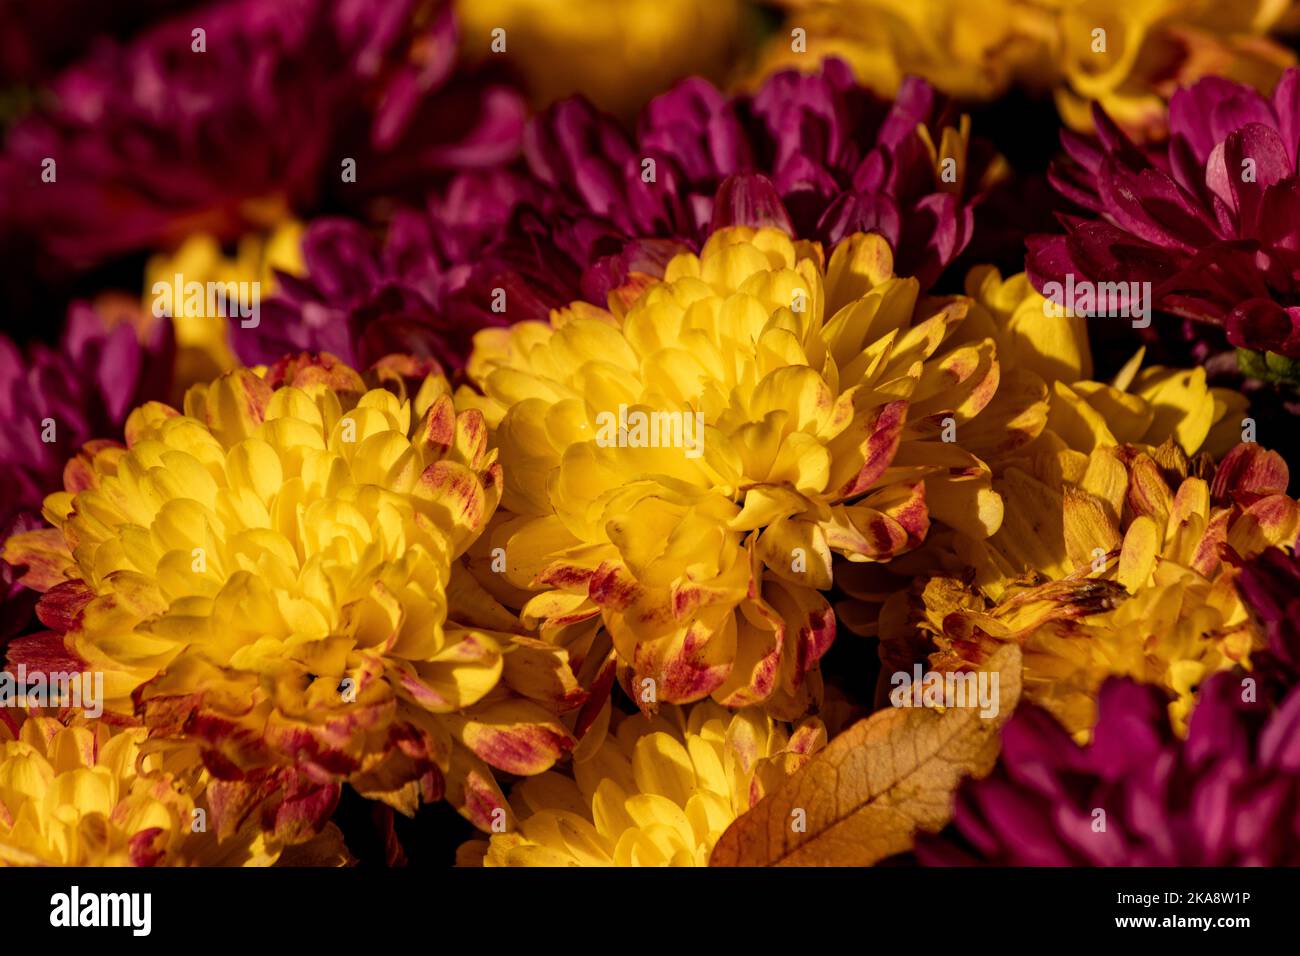 A close view of mums in the fall with a fallen leaves nestled in the blooms Stock Photo